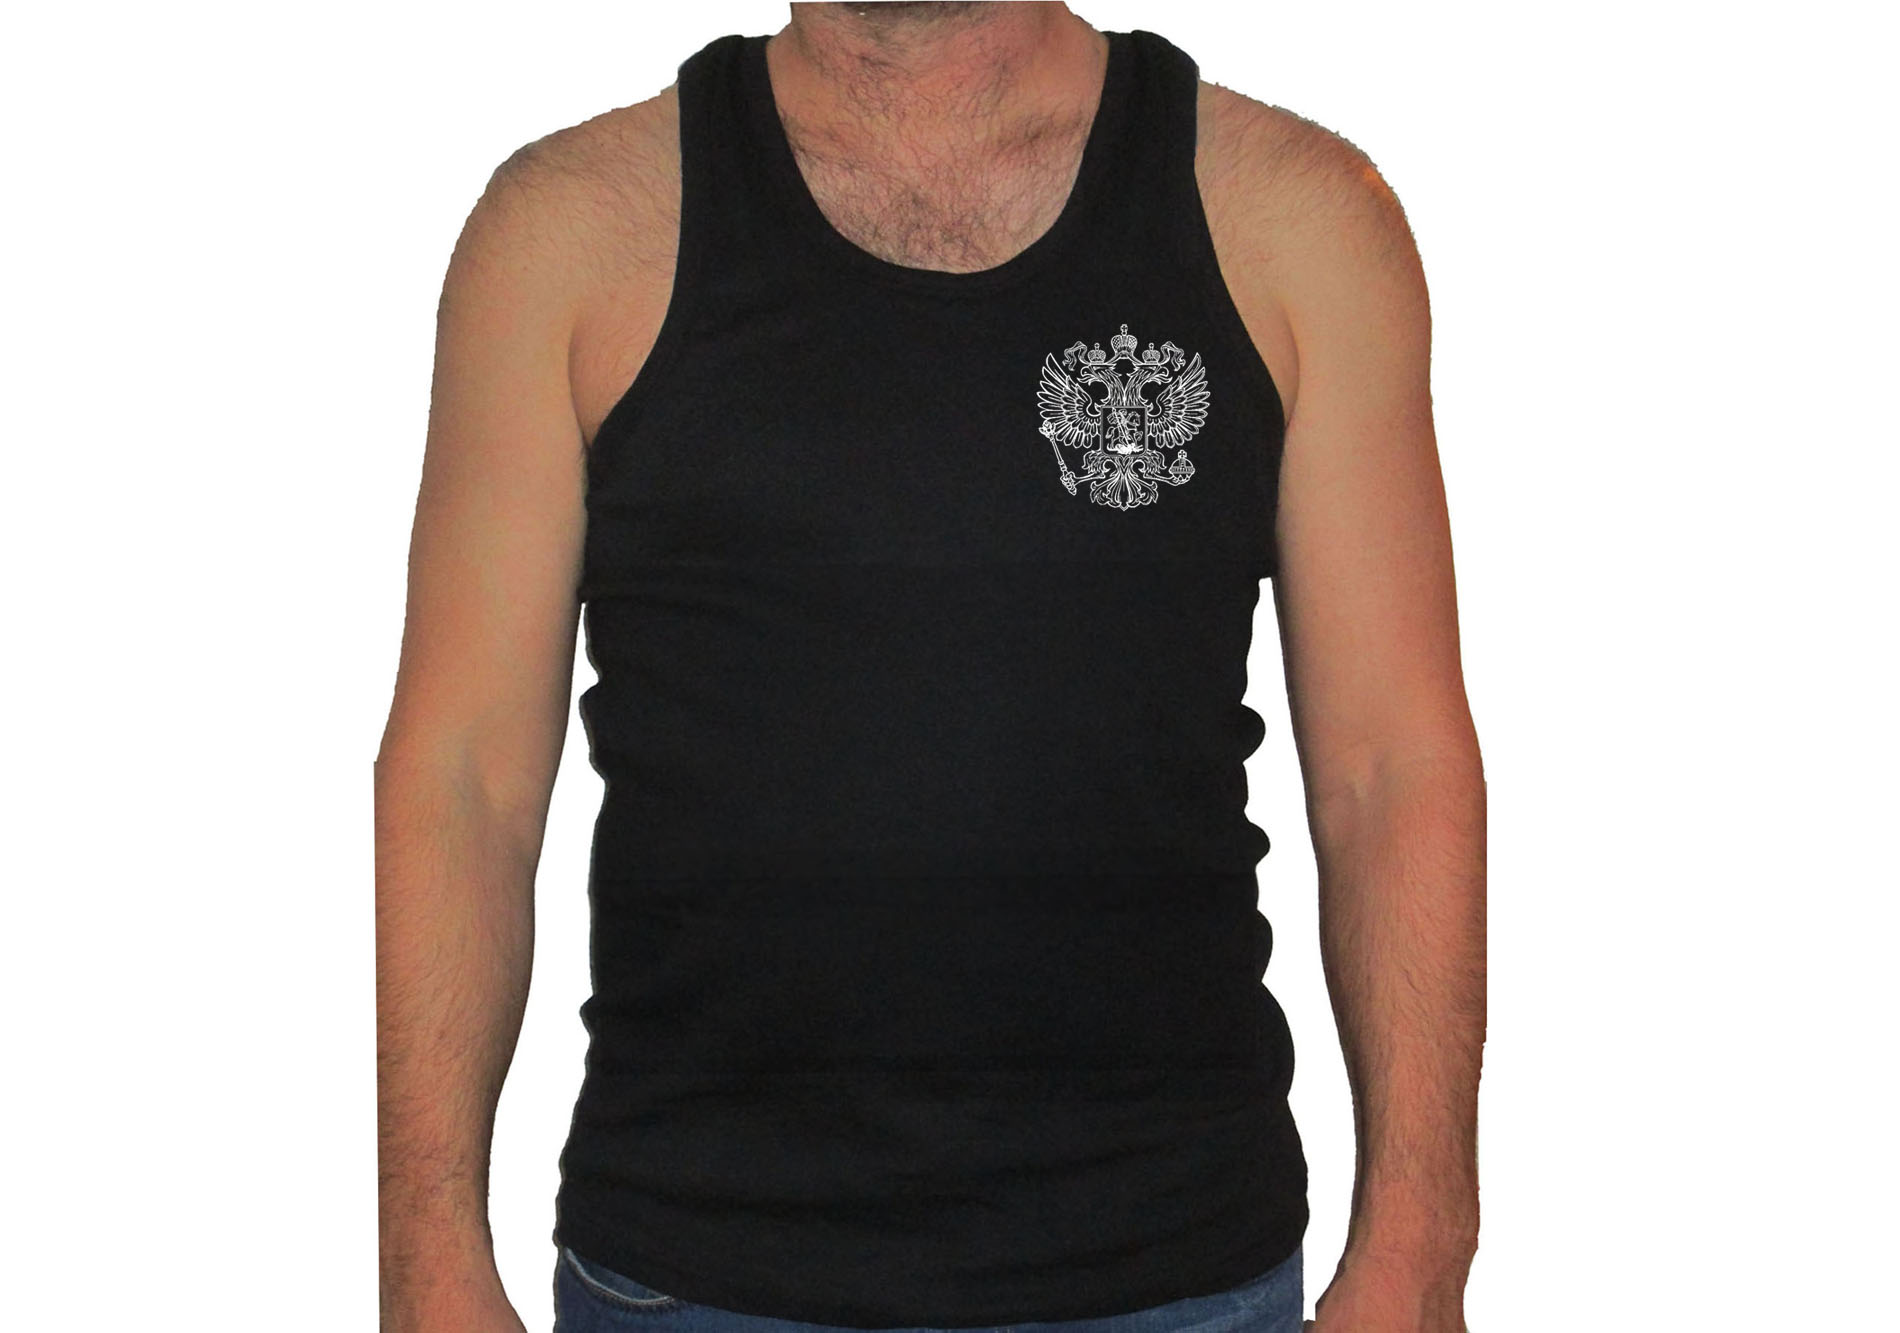 Russian coat of arms two headed eagle man black tank top